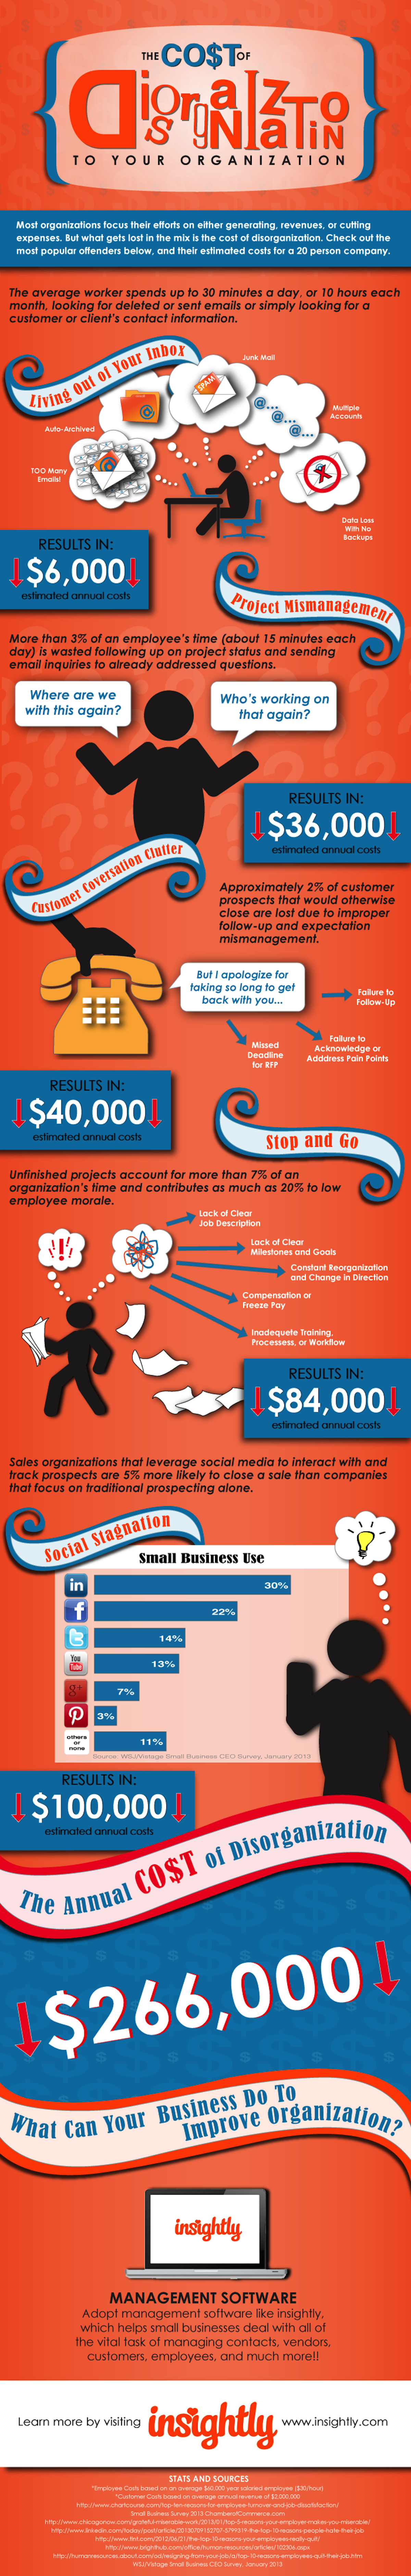 Insightly Infographic Cost of Disorganization